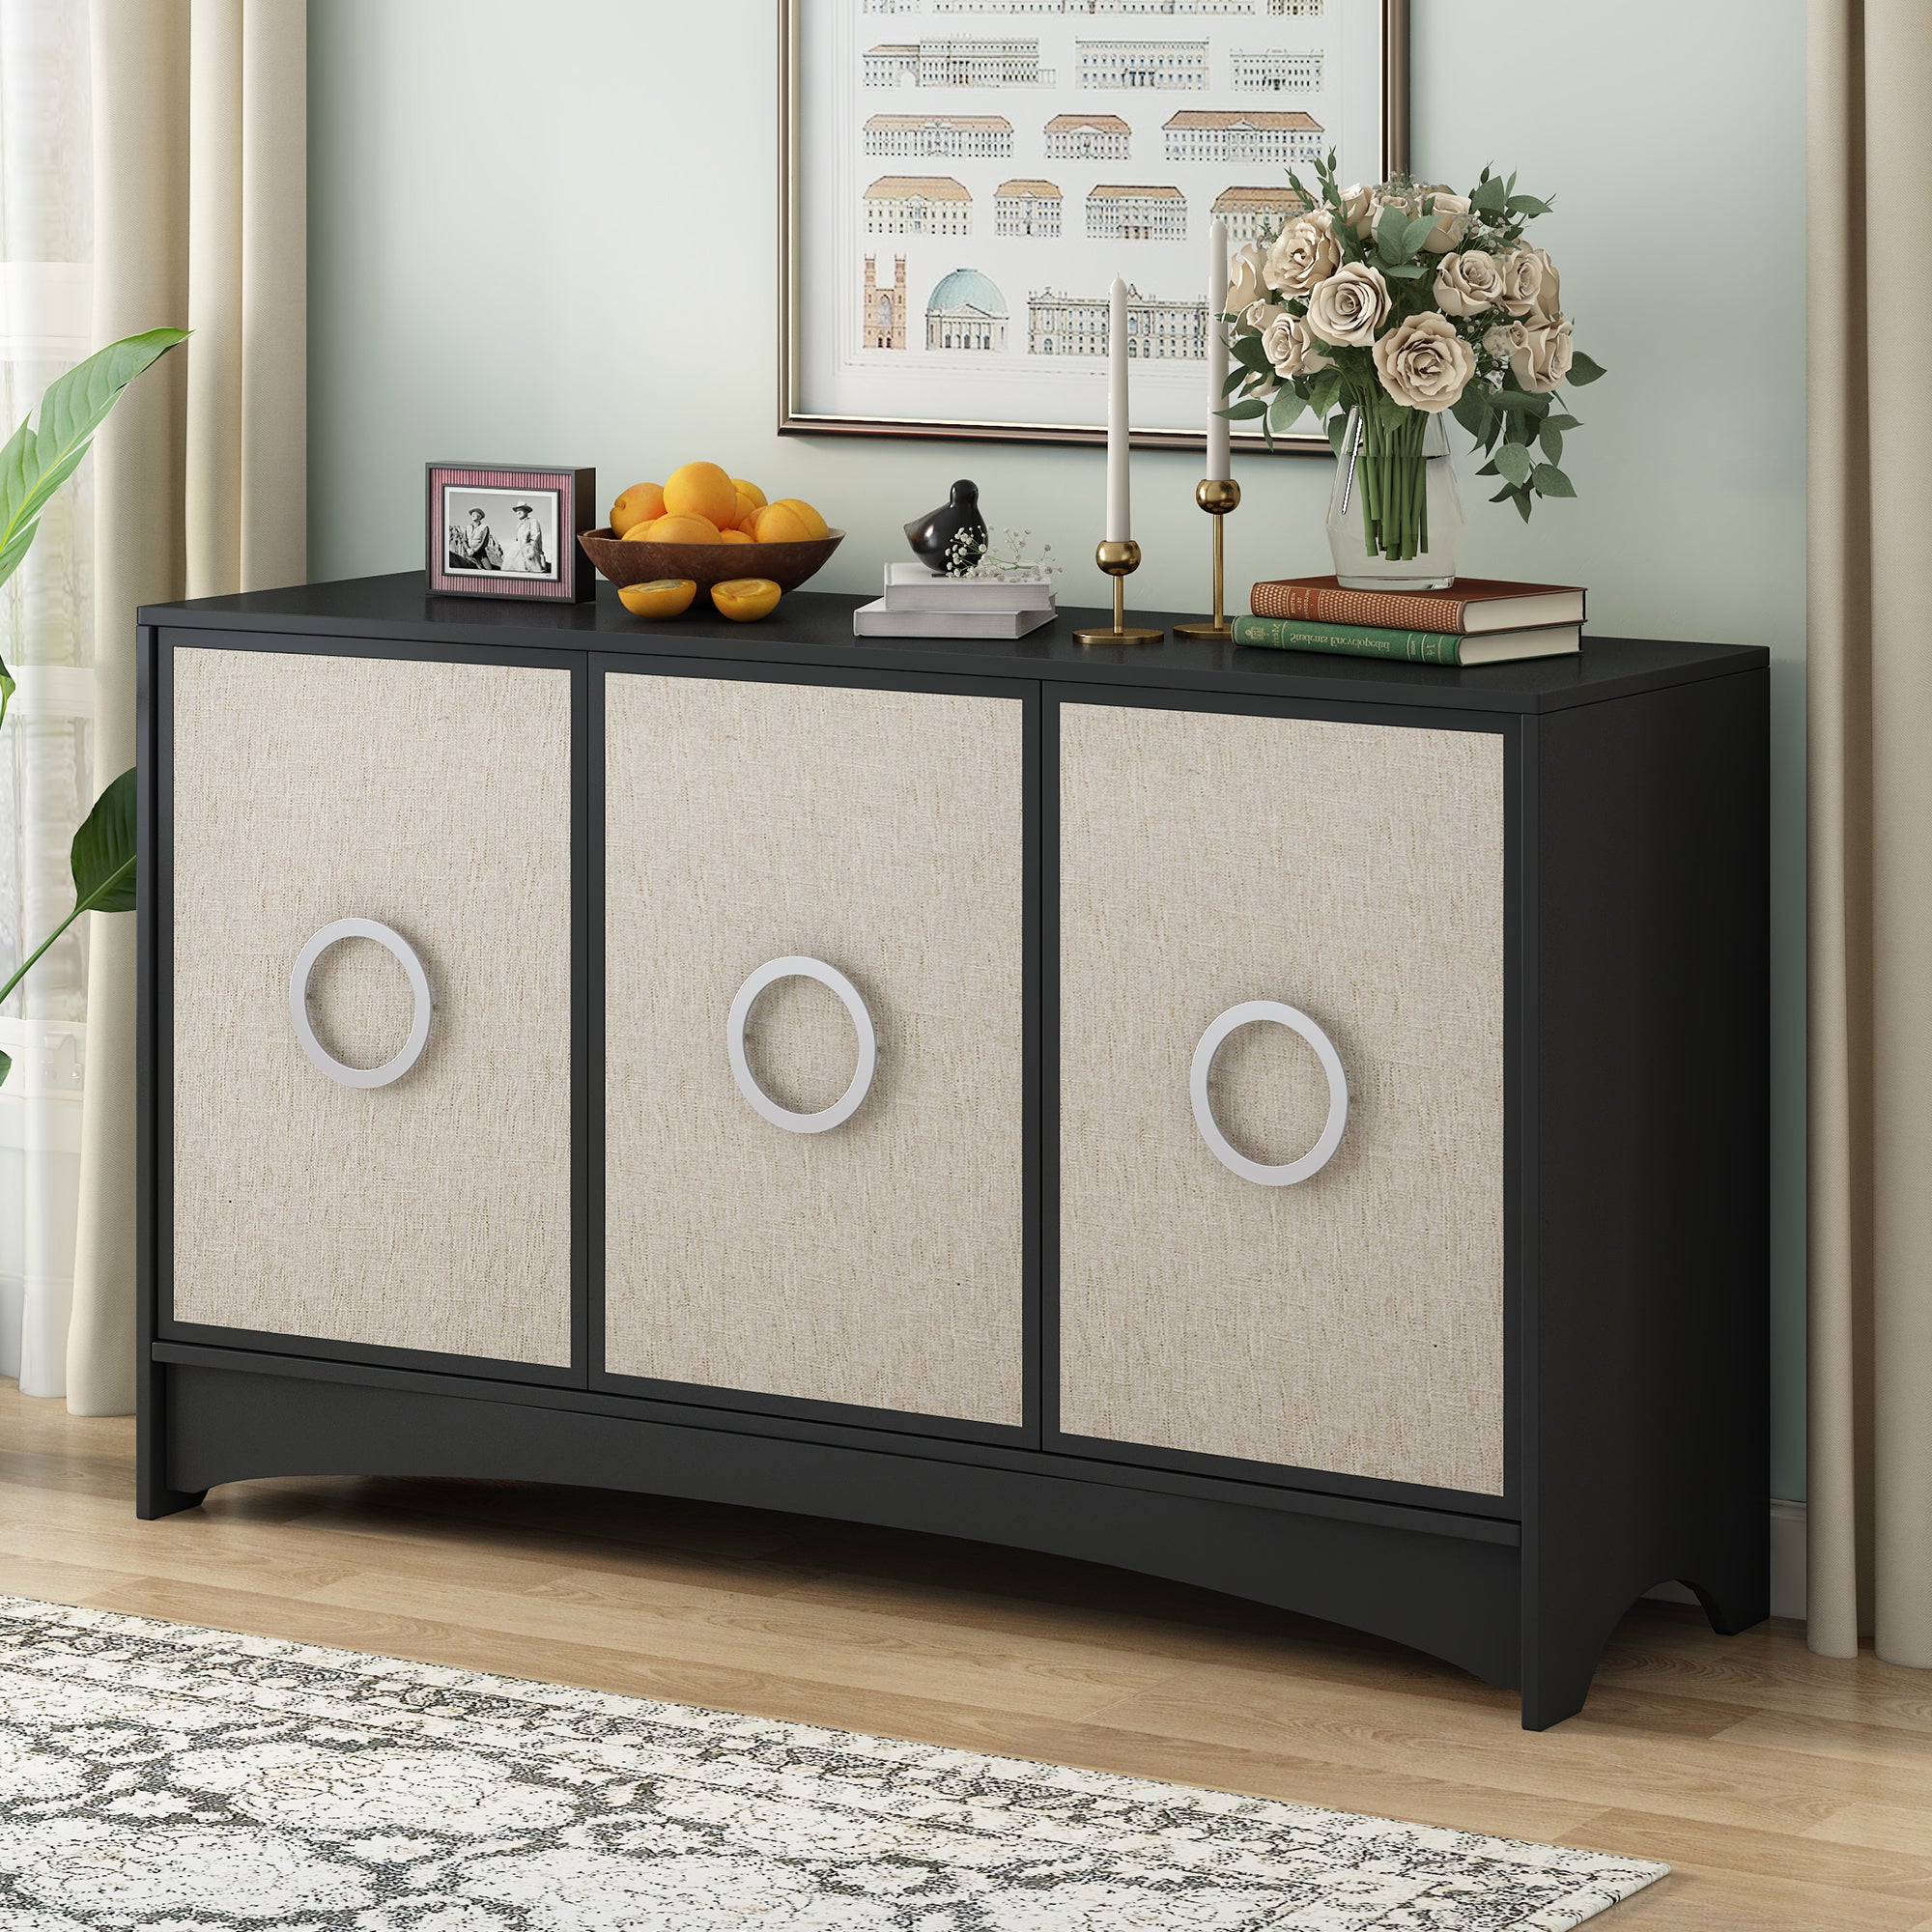 U_Style-Curved-Design-Storage-Cabinet-with-Three-Doors-and-Adjustable-shelves,-Suitable-for-Corridors,-Entrances,-Living-rooms,-and-Study-